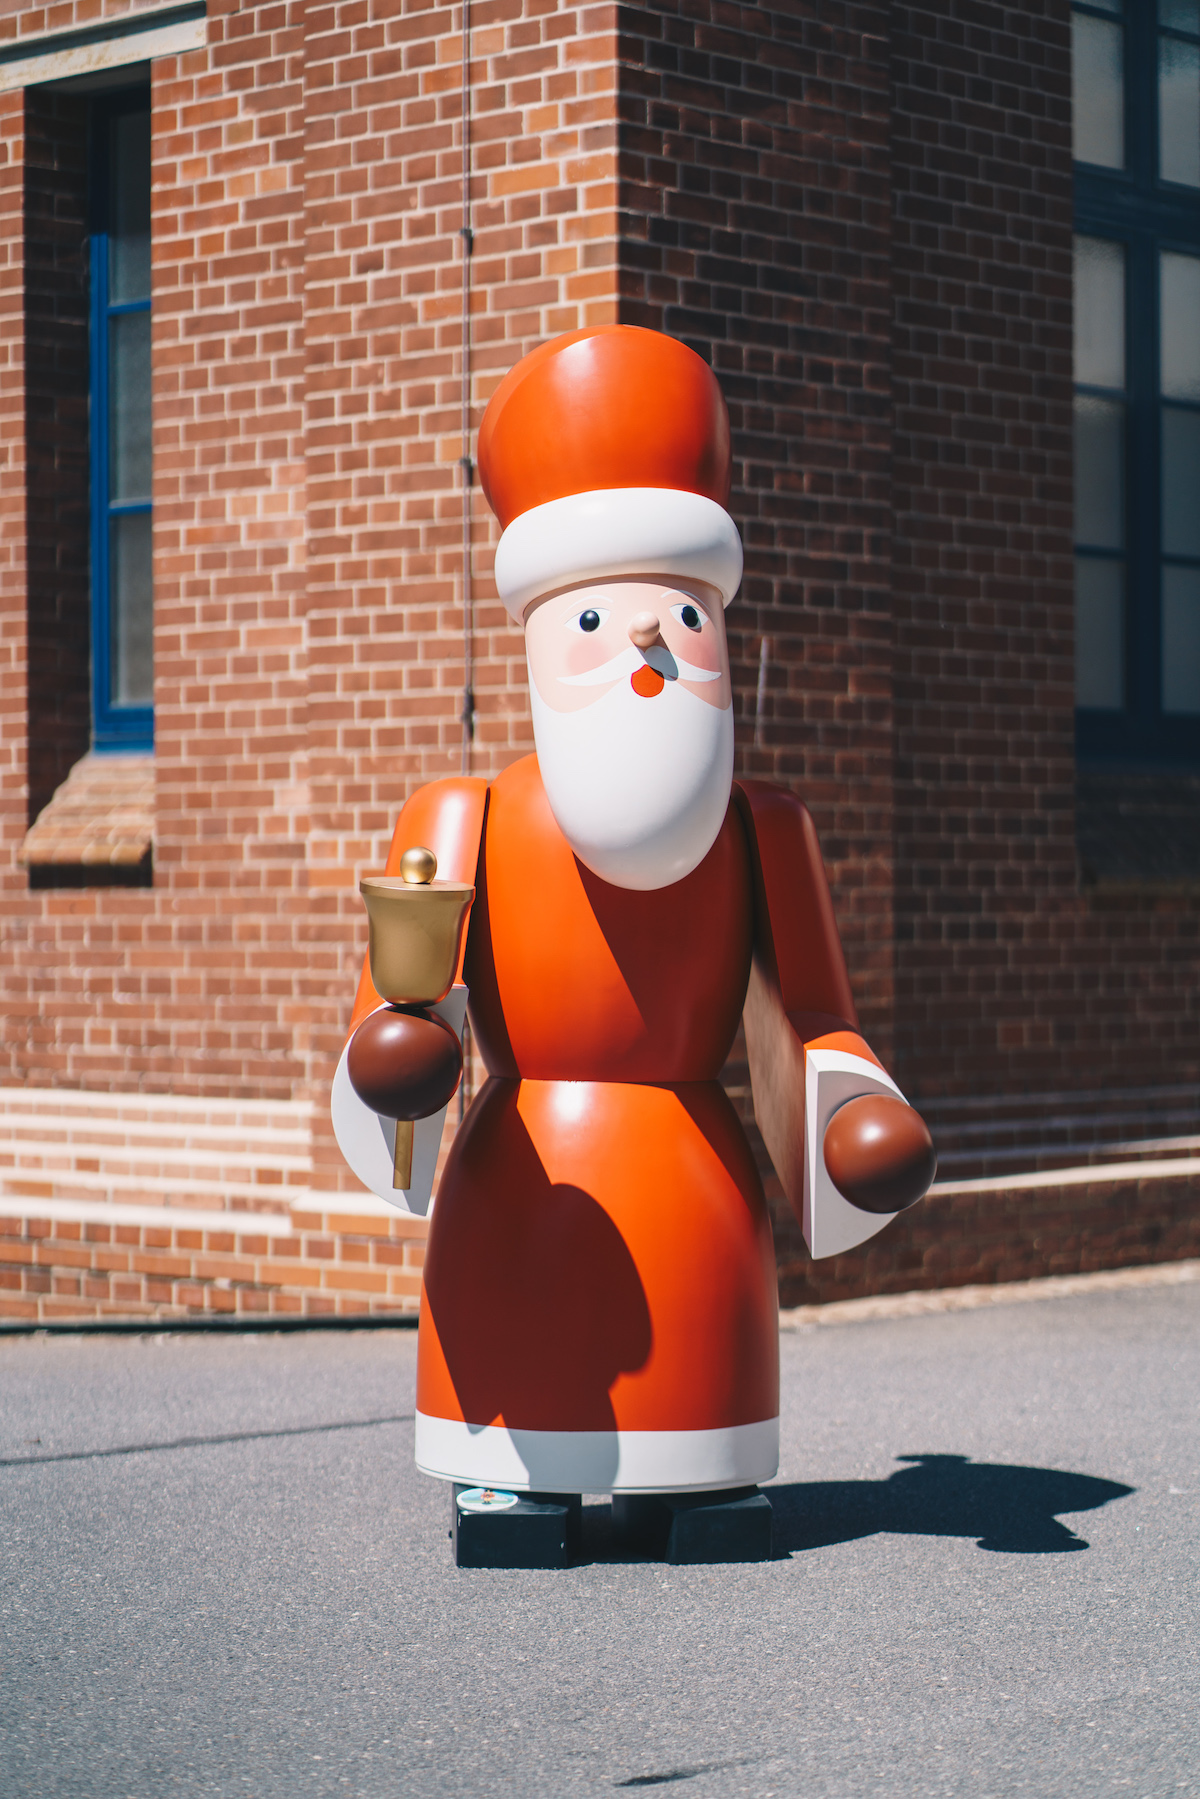 A red life-size Santa Claus made of wood stands in front of a wall of bricks.